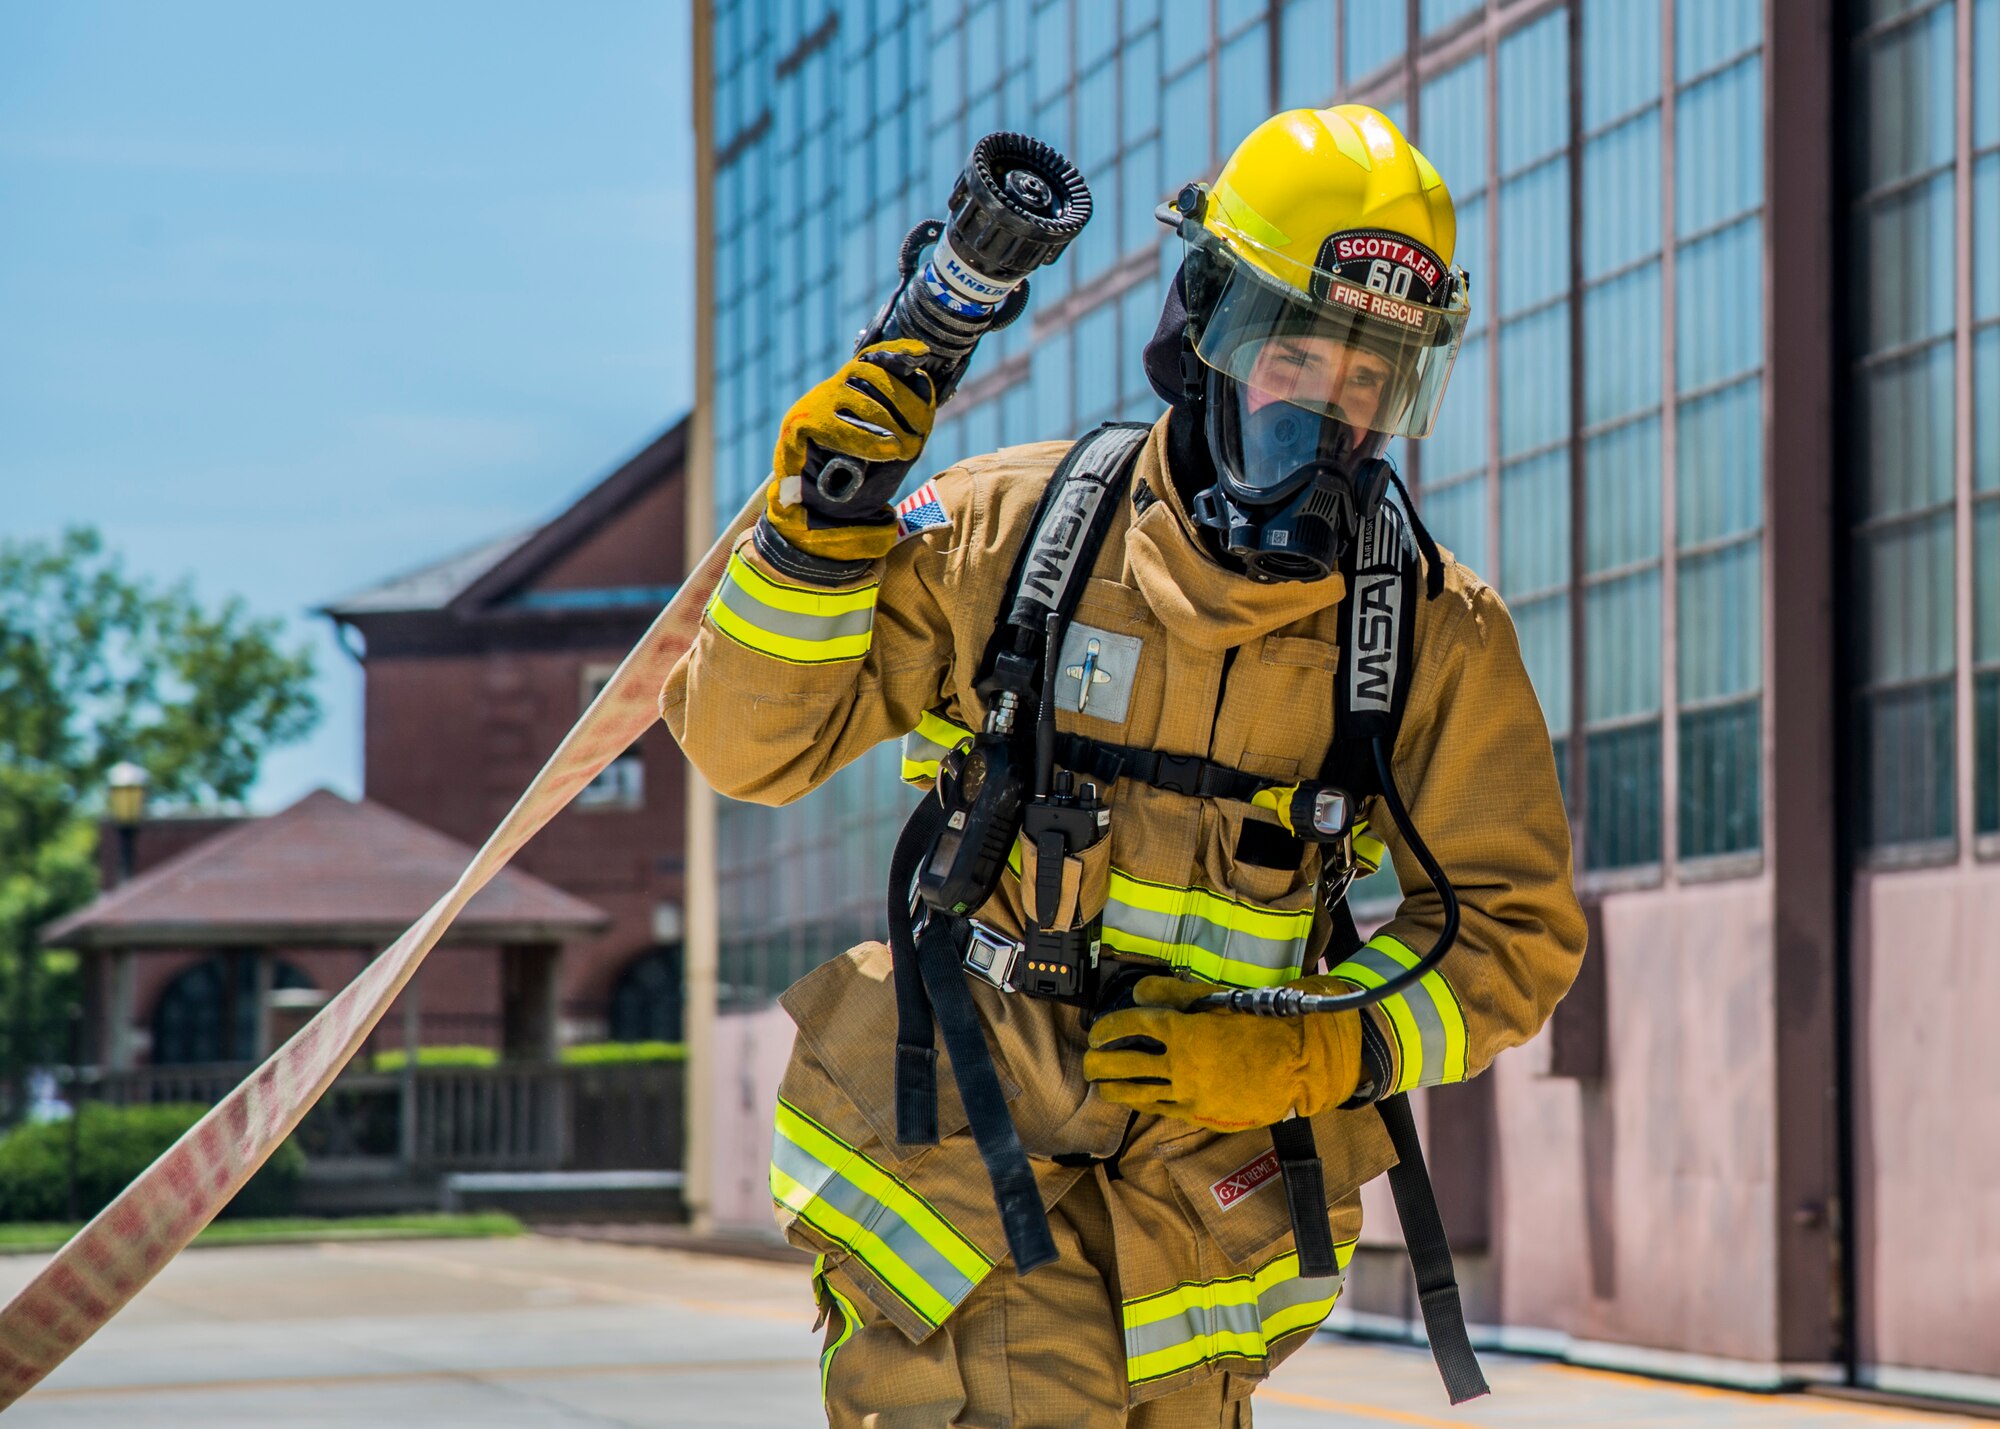 Airman 1st Class Jacob Childs, 375th Civil Engineer Squadron fire fighter, performs a hose drag during a training exercise at Scott Air Force Base, Ill. on June 22, 2017. The exercise was part of the unit's Airport Rescue and Fire Fighting's training which tests their ability to arrive on scene, fight fires, and provide a rescue path as well as recover or rescue personnel. (U.S. Air Force photo by Airman 1st Class Daniel Garcia)